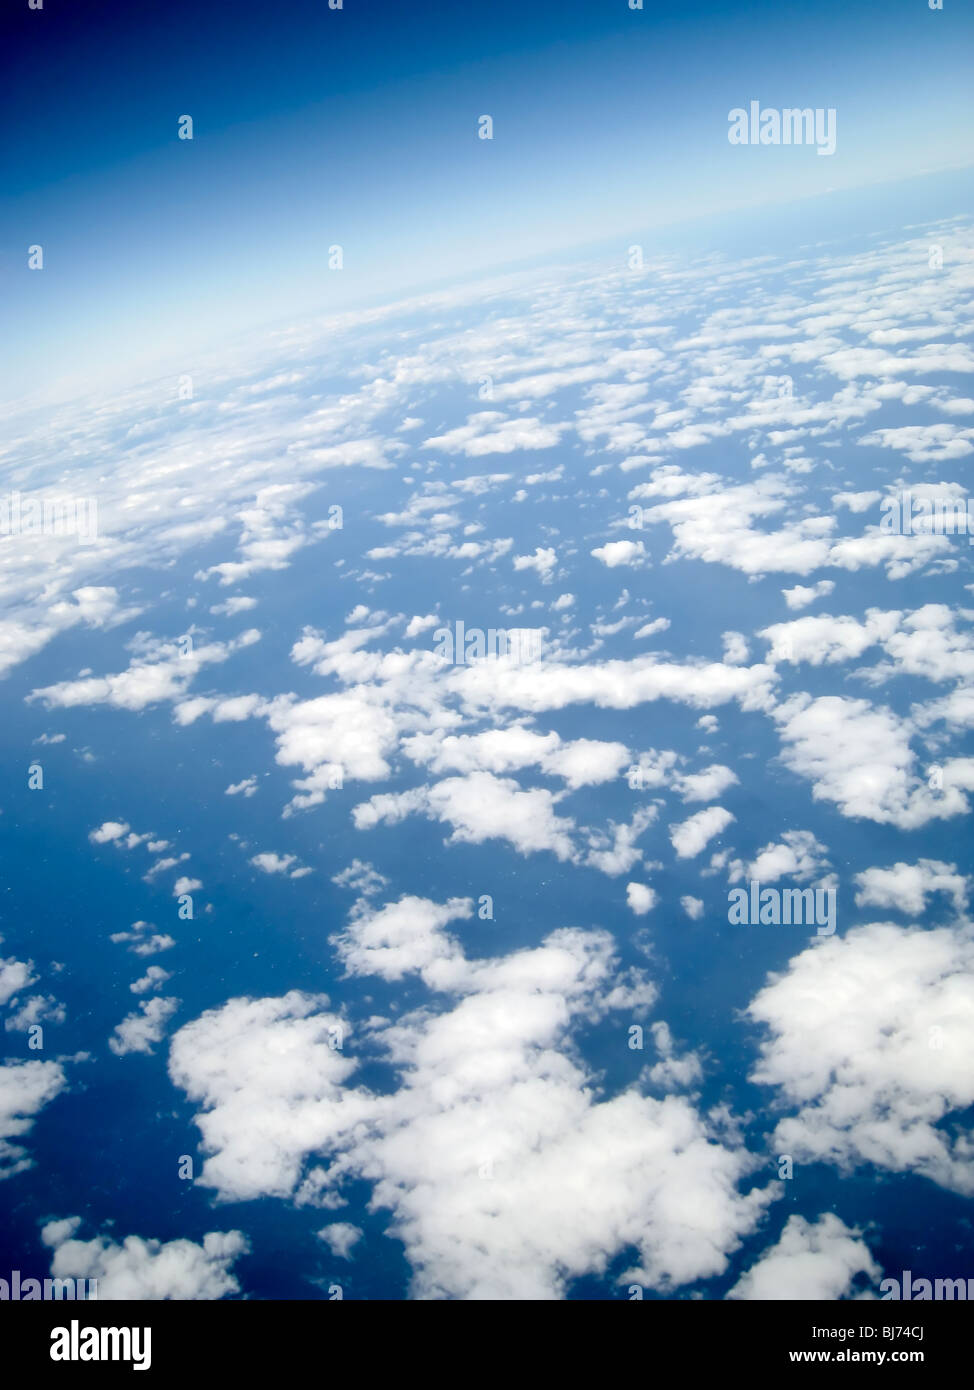 Wide angle view of earth from high up Stock Photo